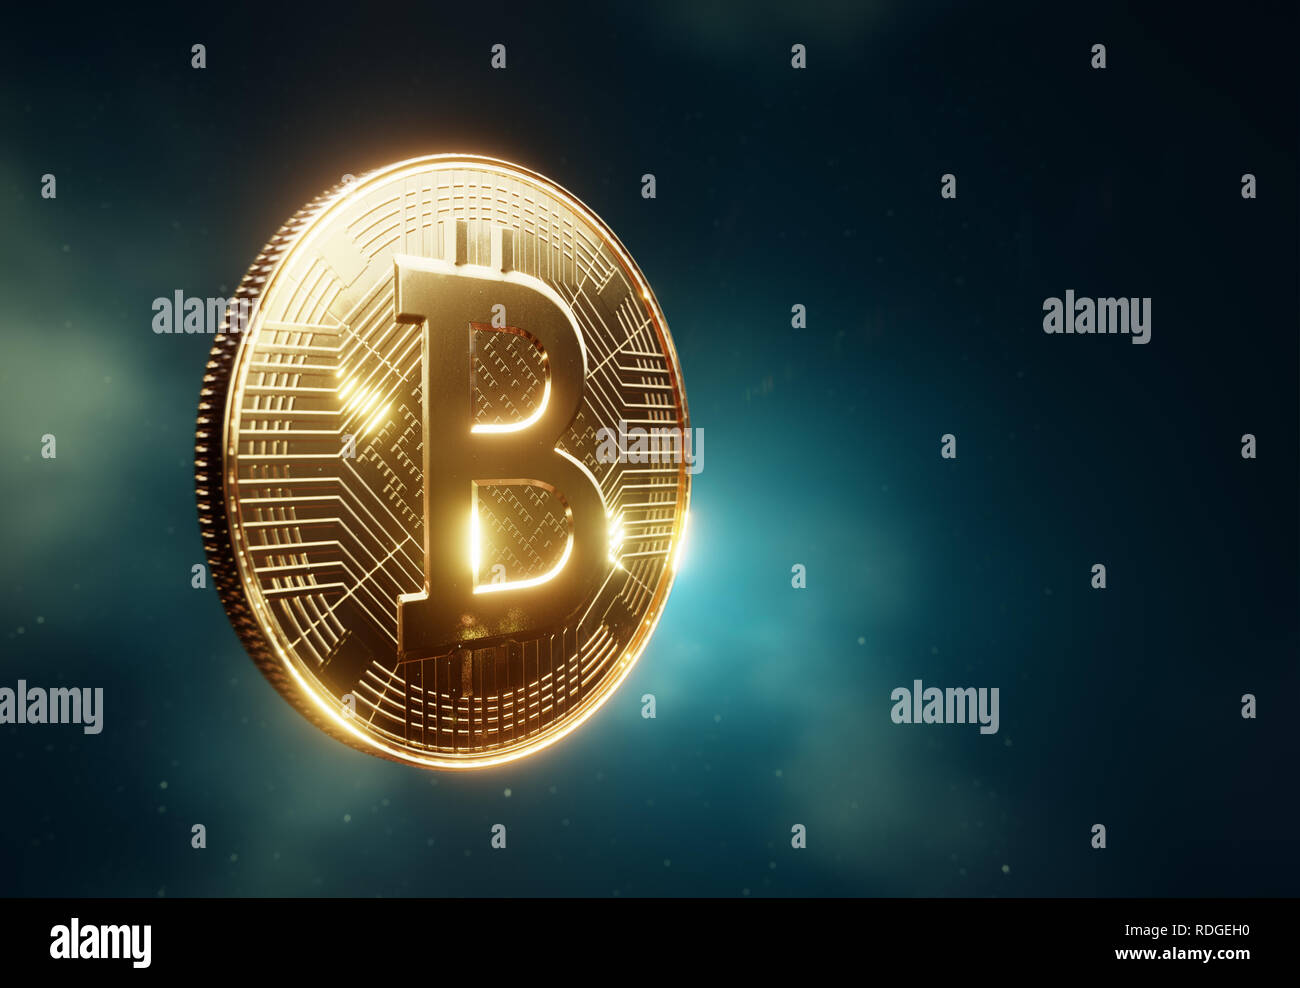 Bitcoin coin visualization, side view in a cloudy space, 3D illustration Stock Photo